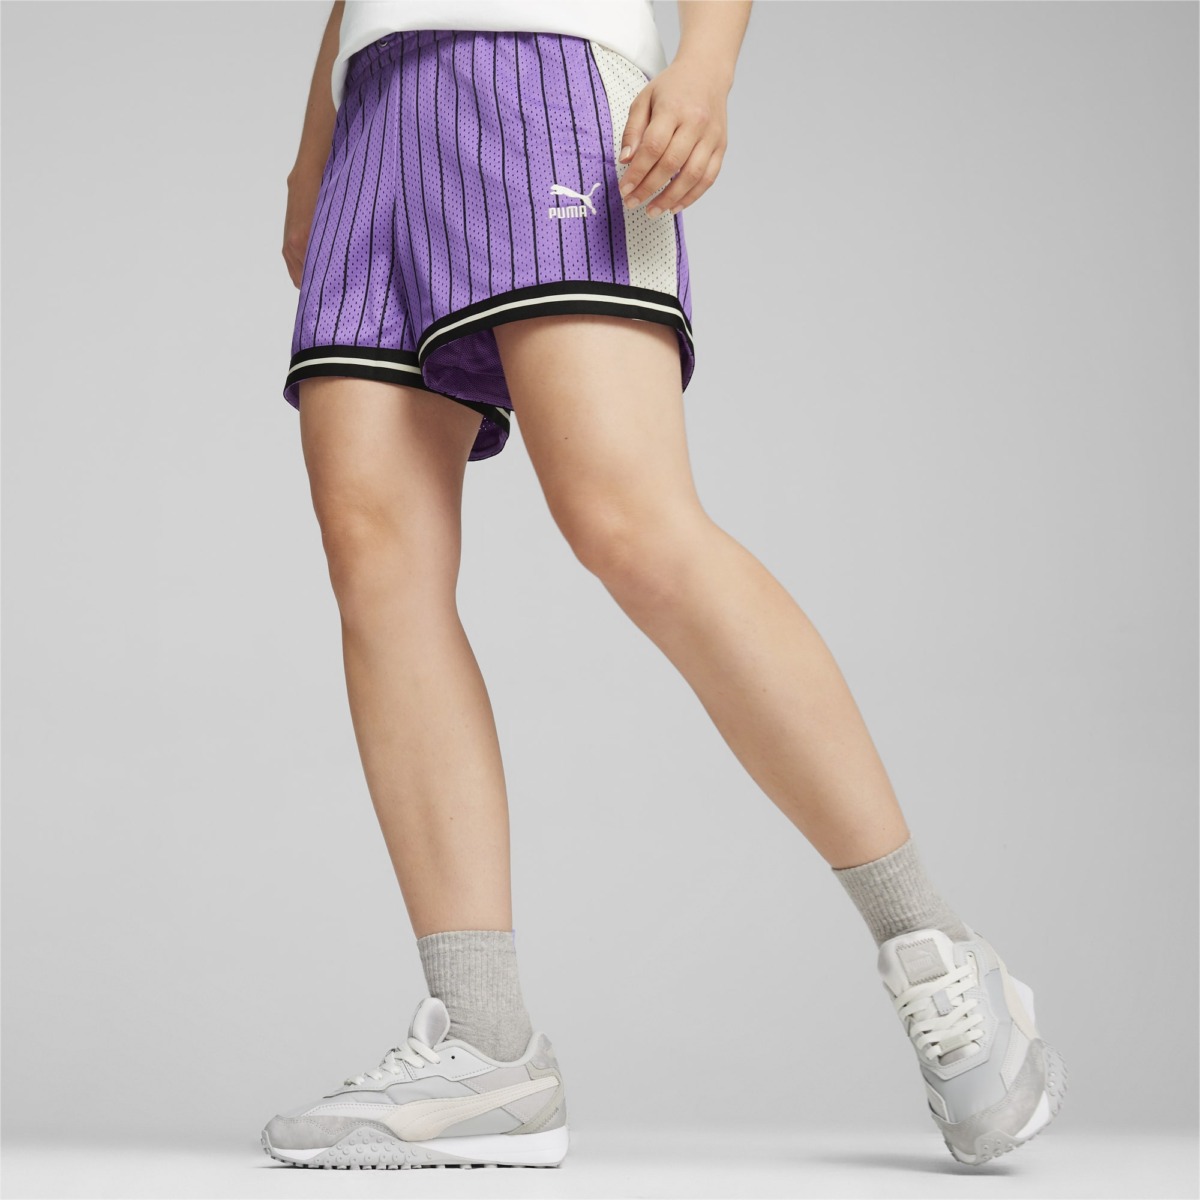 Shorts in Purple for Woman at Puma GOOFASH